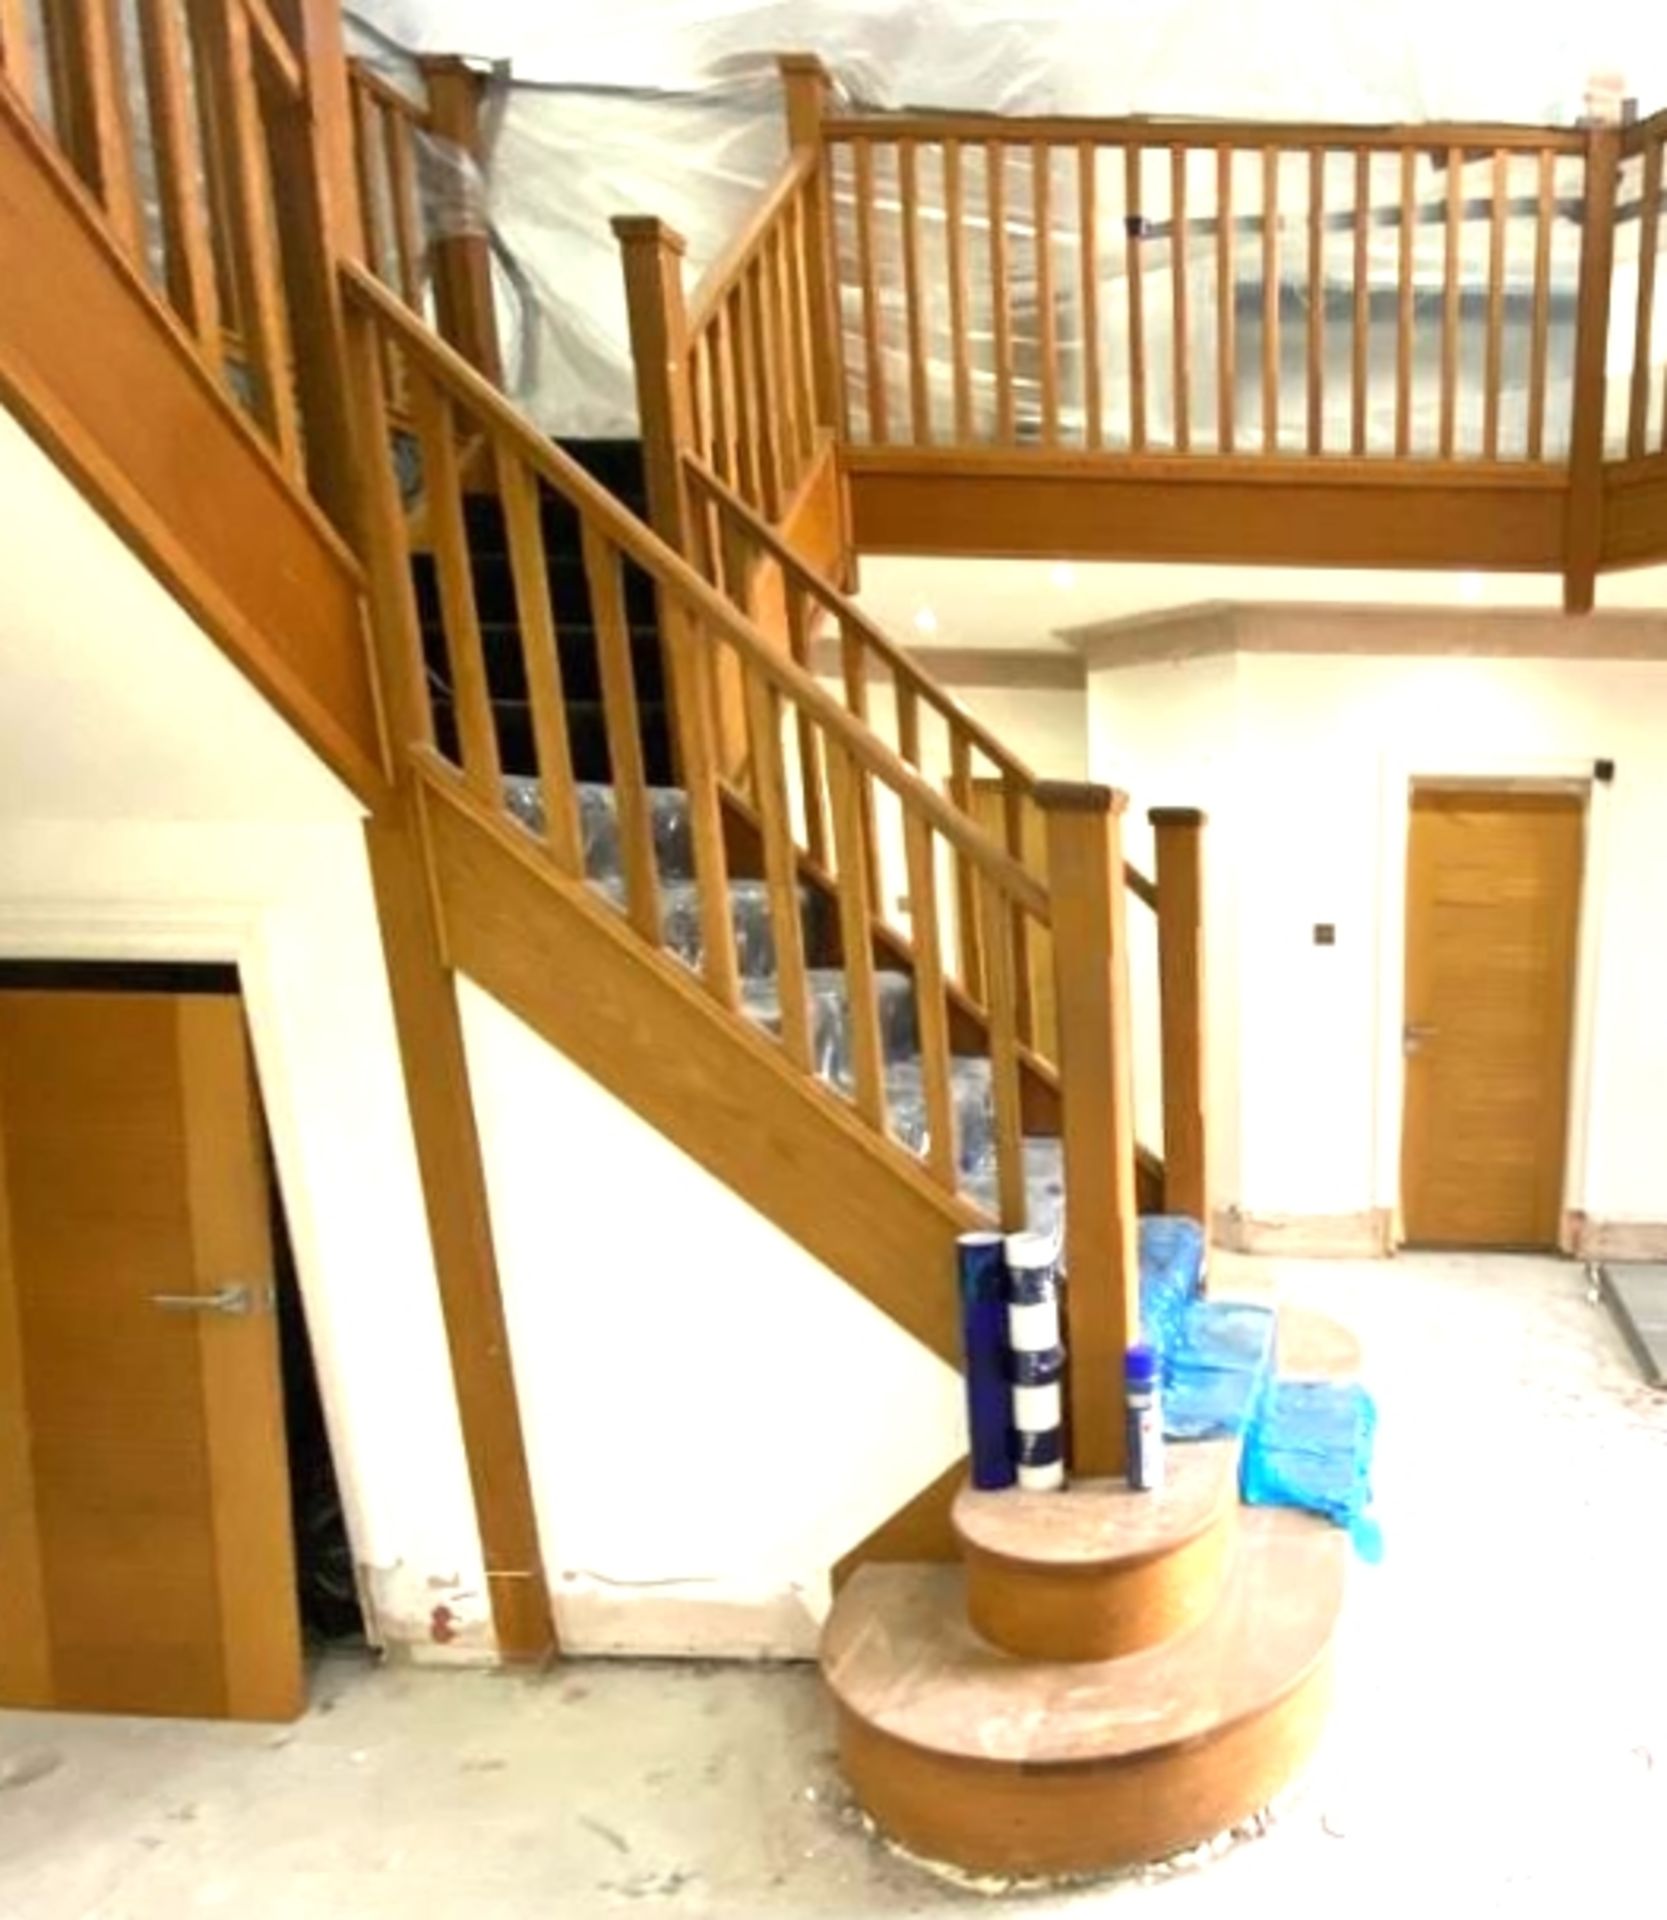 Solid Oak Staircase and Landing Accessories Including Spindles, Posts and Handrails - Approx 140 - Image 4 of 5